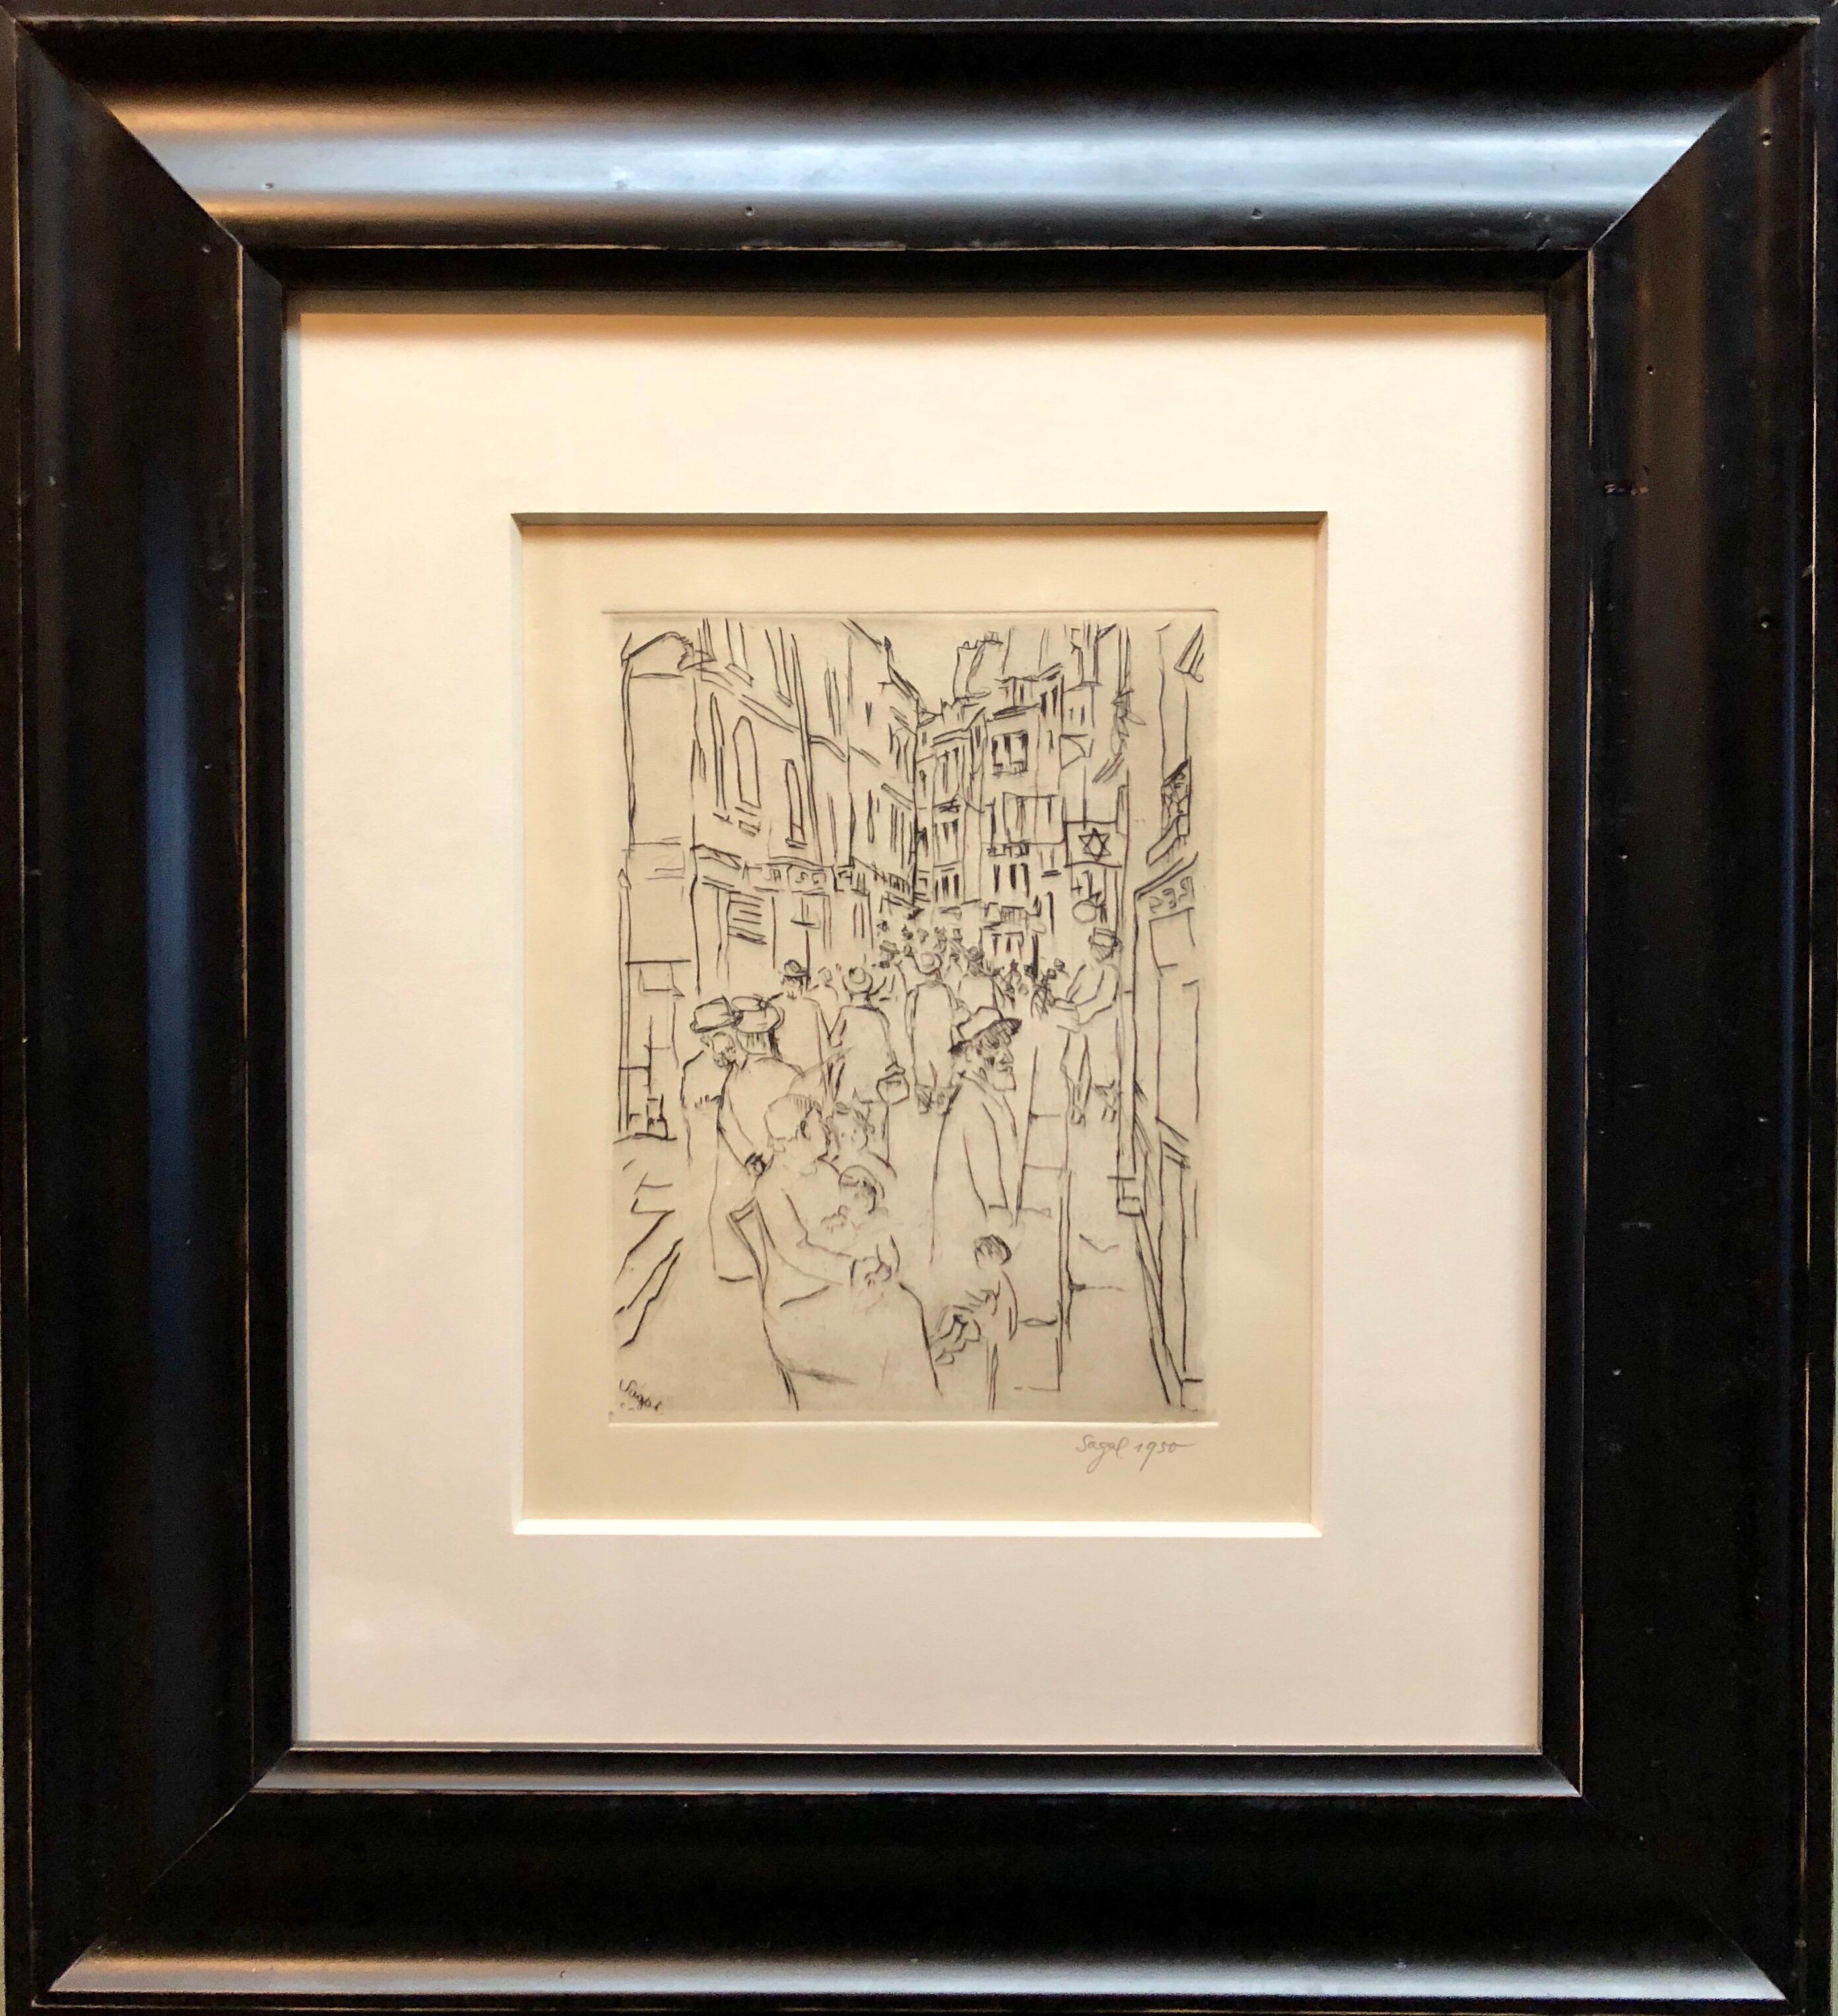 10x8 plate size, 20.25x18 including frame

Wladimir Sagal  Witebsk, Weißrußland (Vitebsk, White Russia)
Well Listed Painter and Holocaust Survivor Limited Edition, Pencil Signed, Dated, Numbered. 
Vladimir Sagal-Sagalowitz was born in in Vitebsk